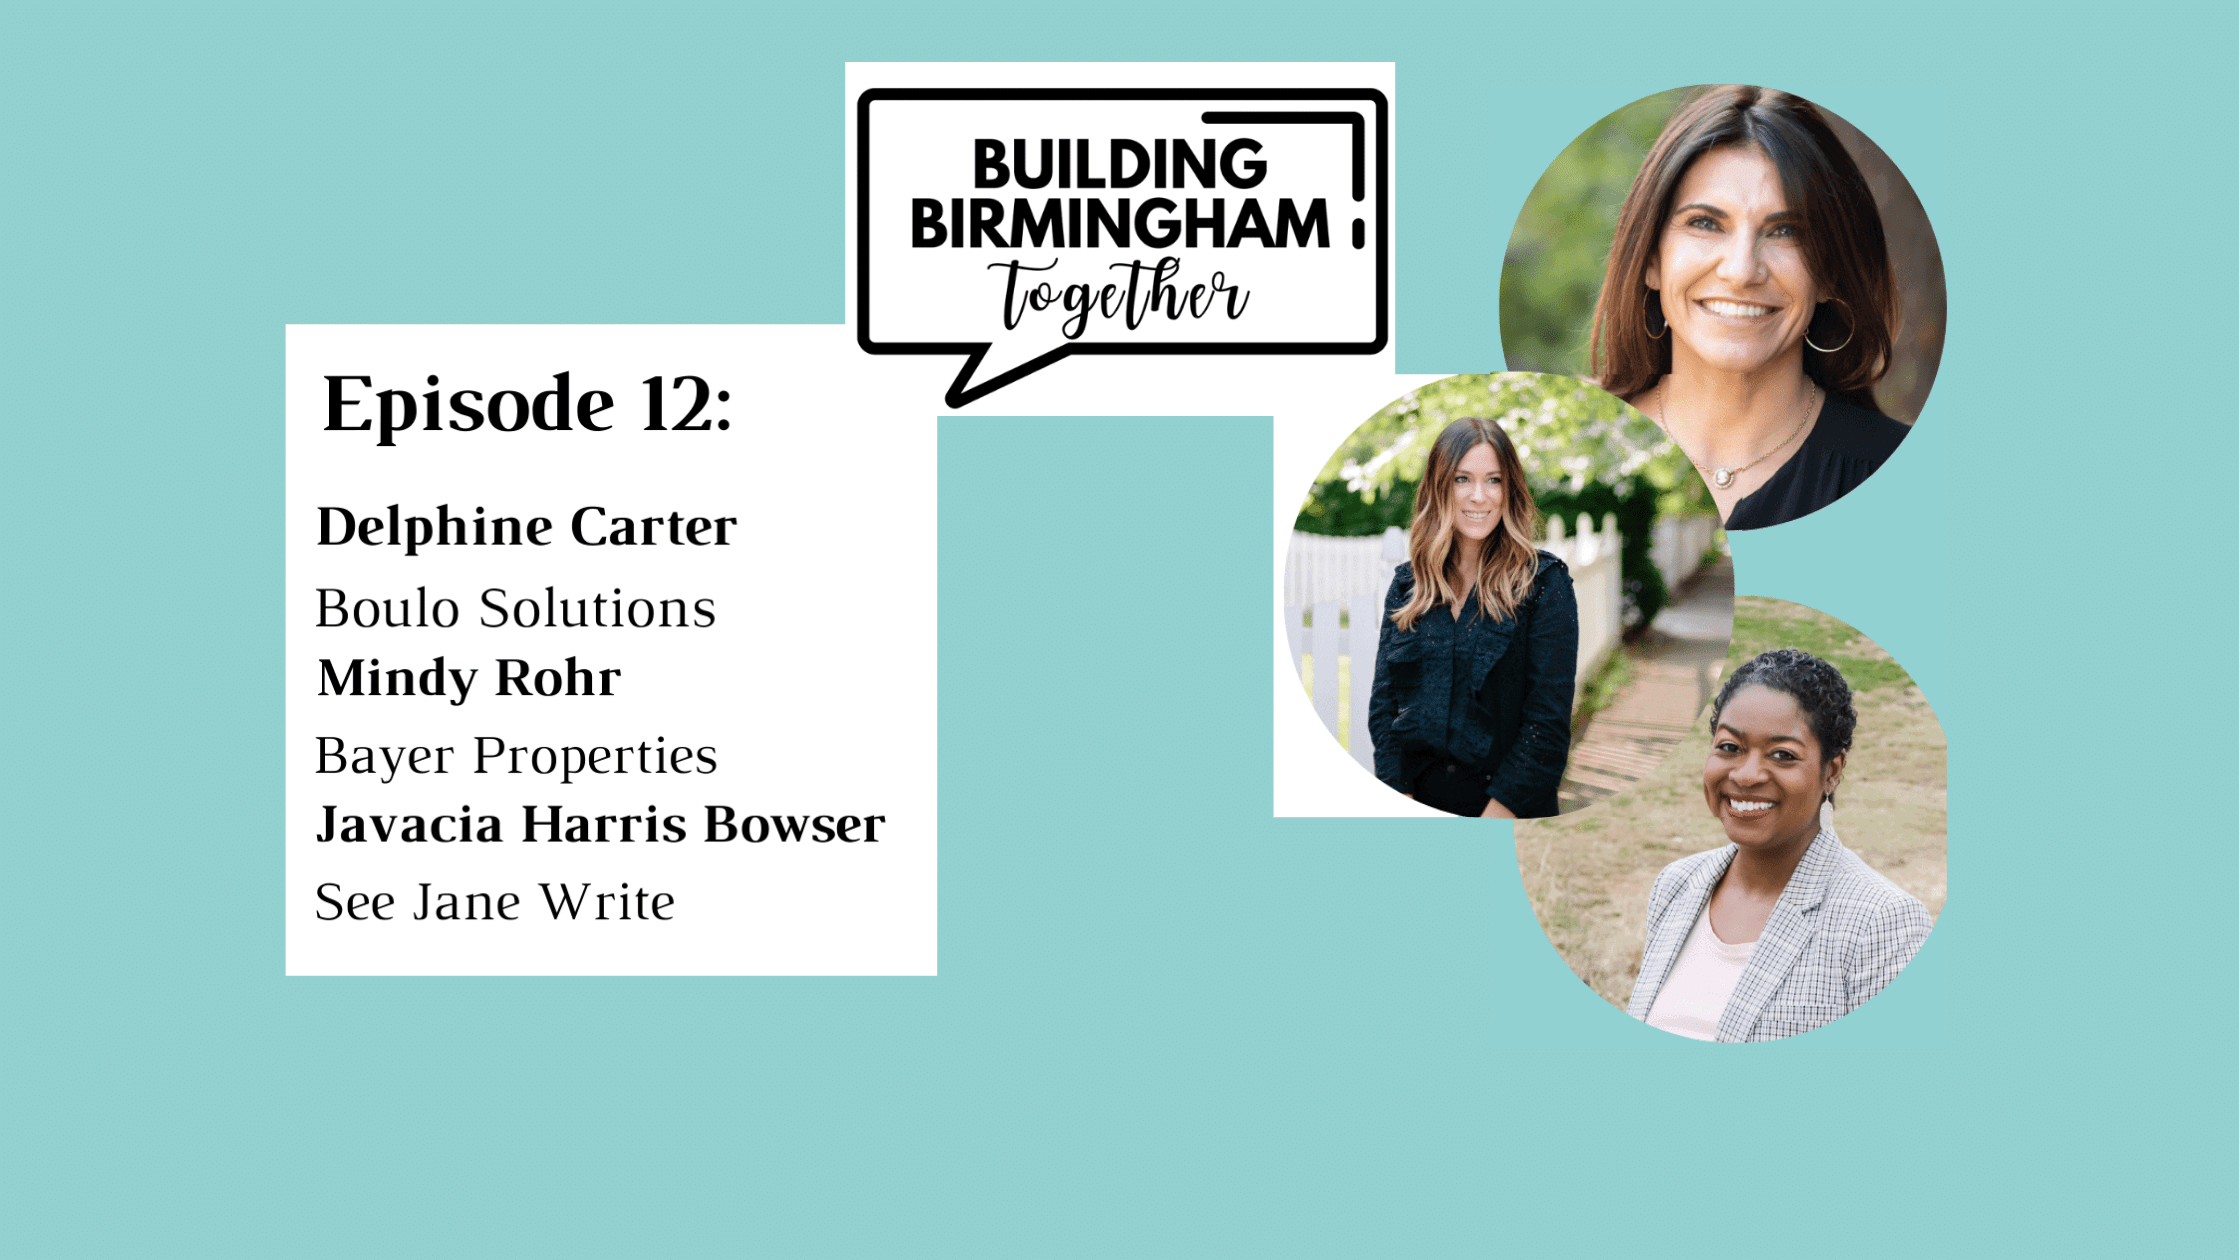 International Women's Day: Failures and Lessons Learned Building Birmingham Podcast Image with Delphine Carter, Mindy Rohr, Javacia Harris Bowser photos